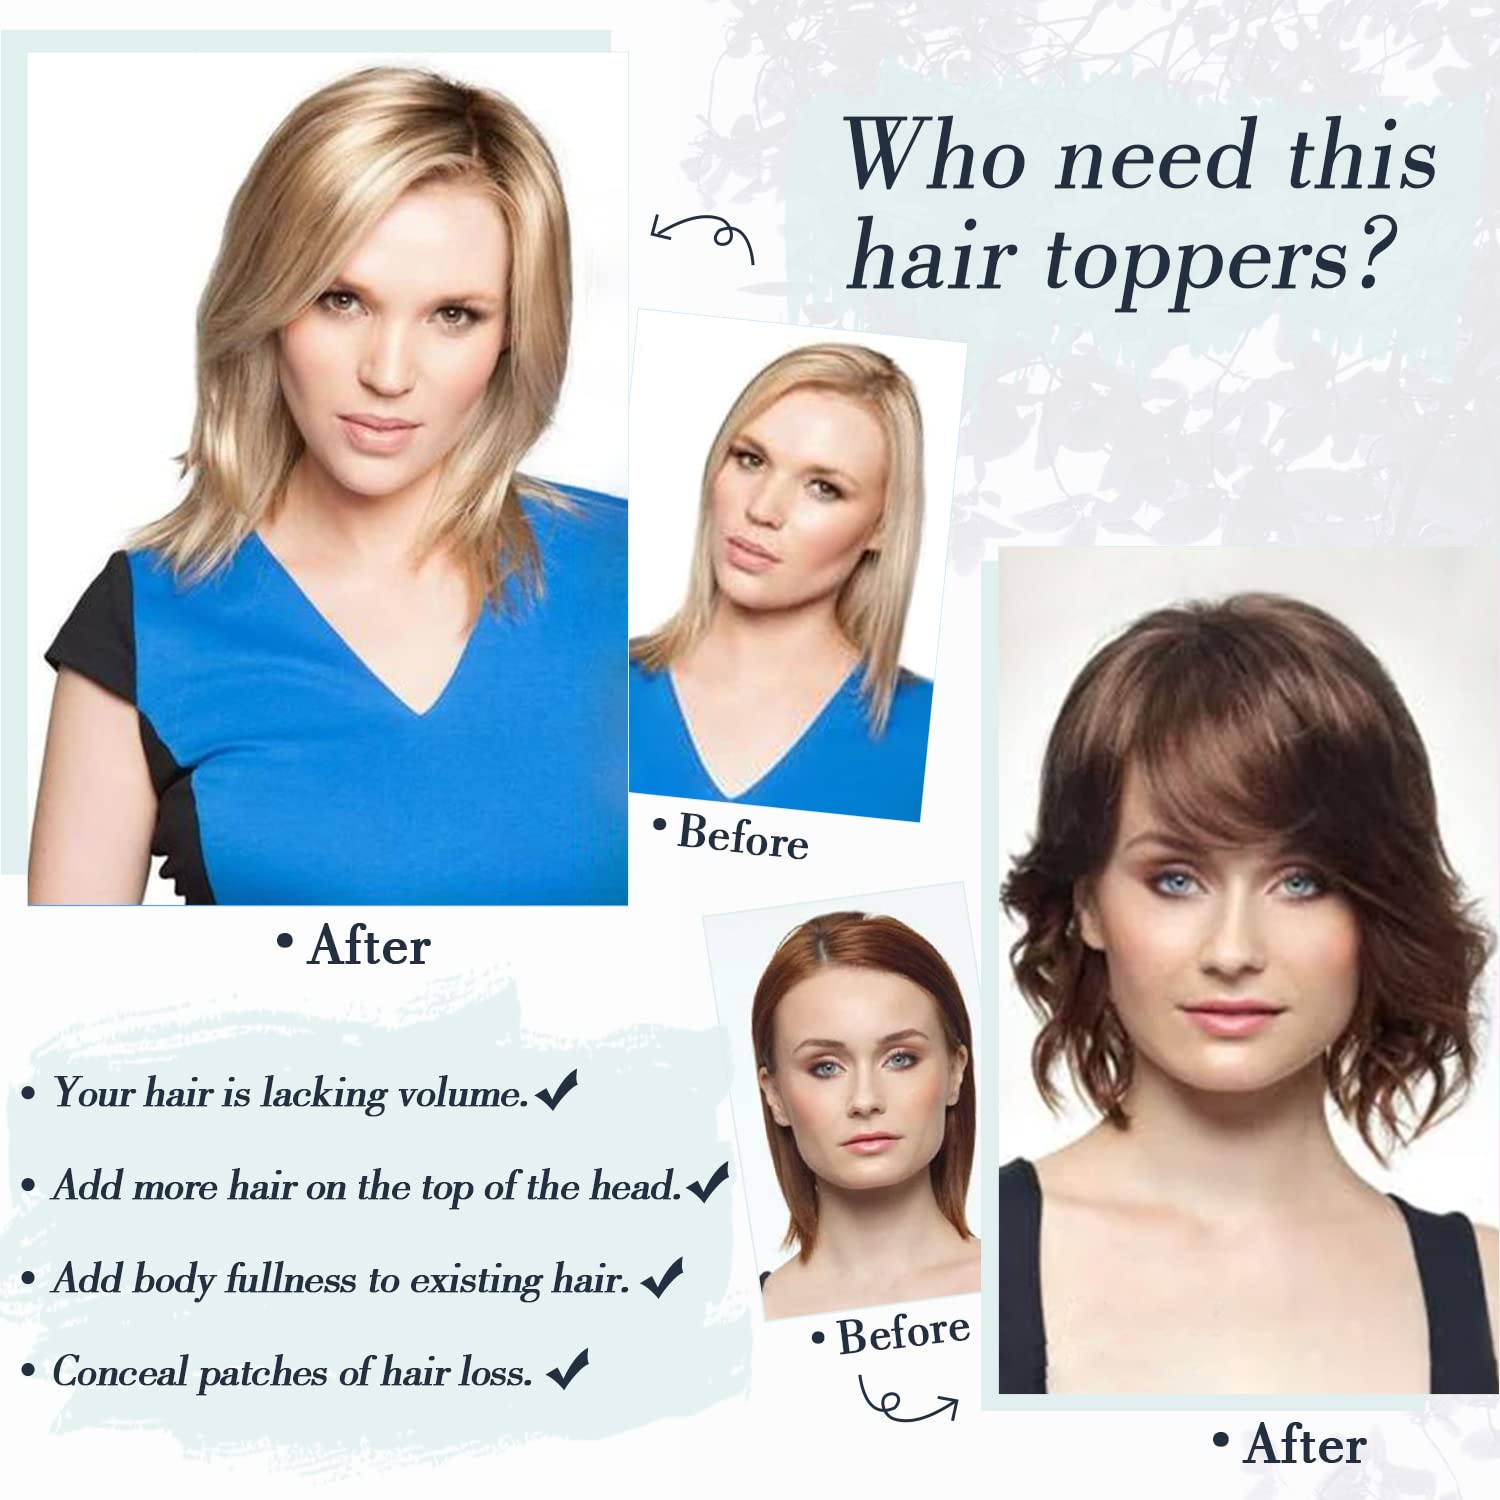 How to choose hair topper